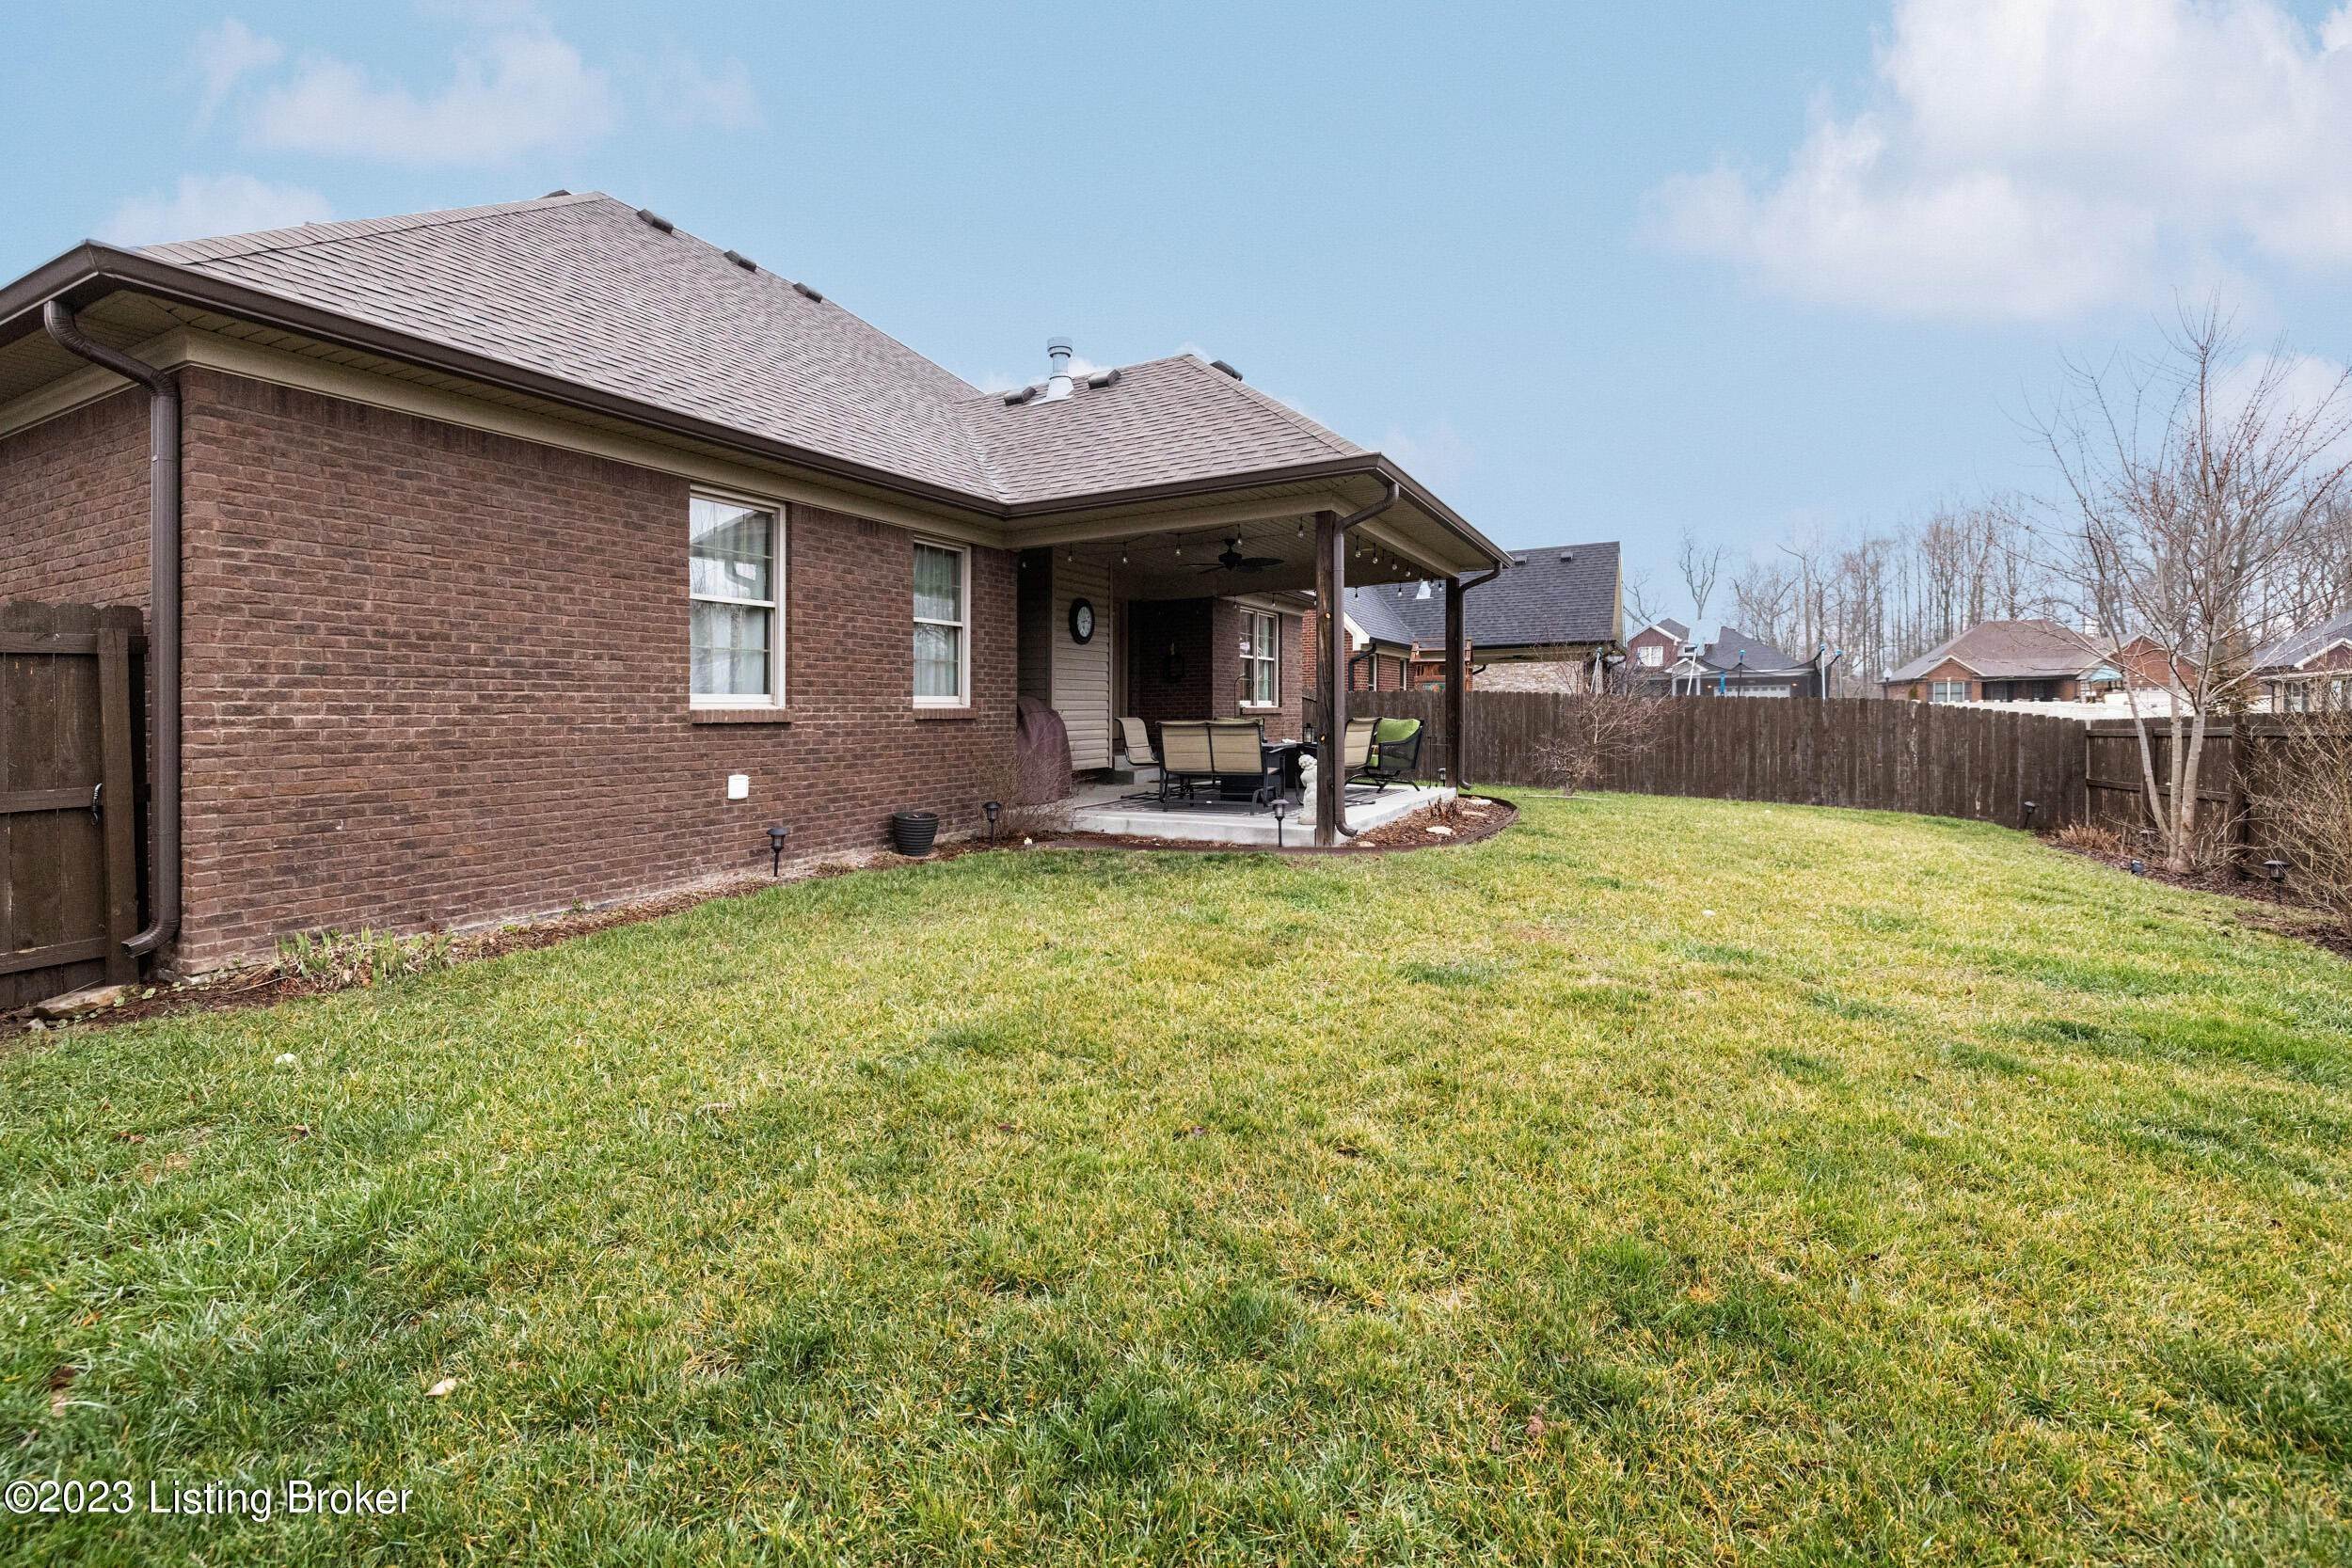 22. Single Family at Louisville, KY 40214